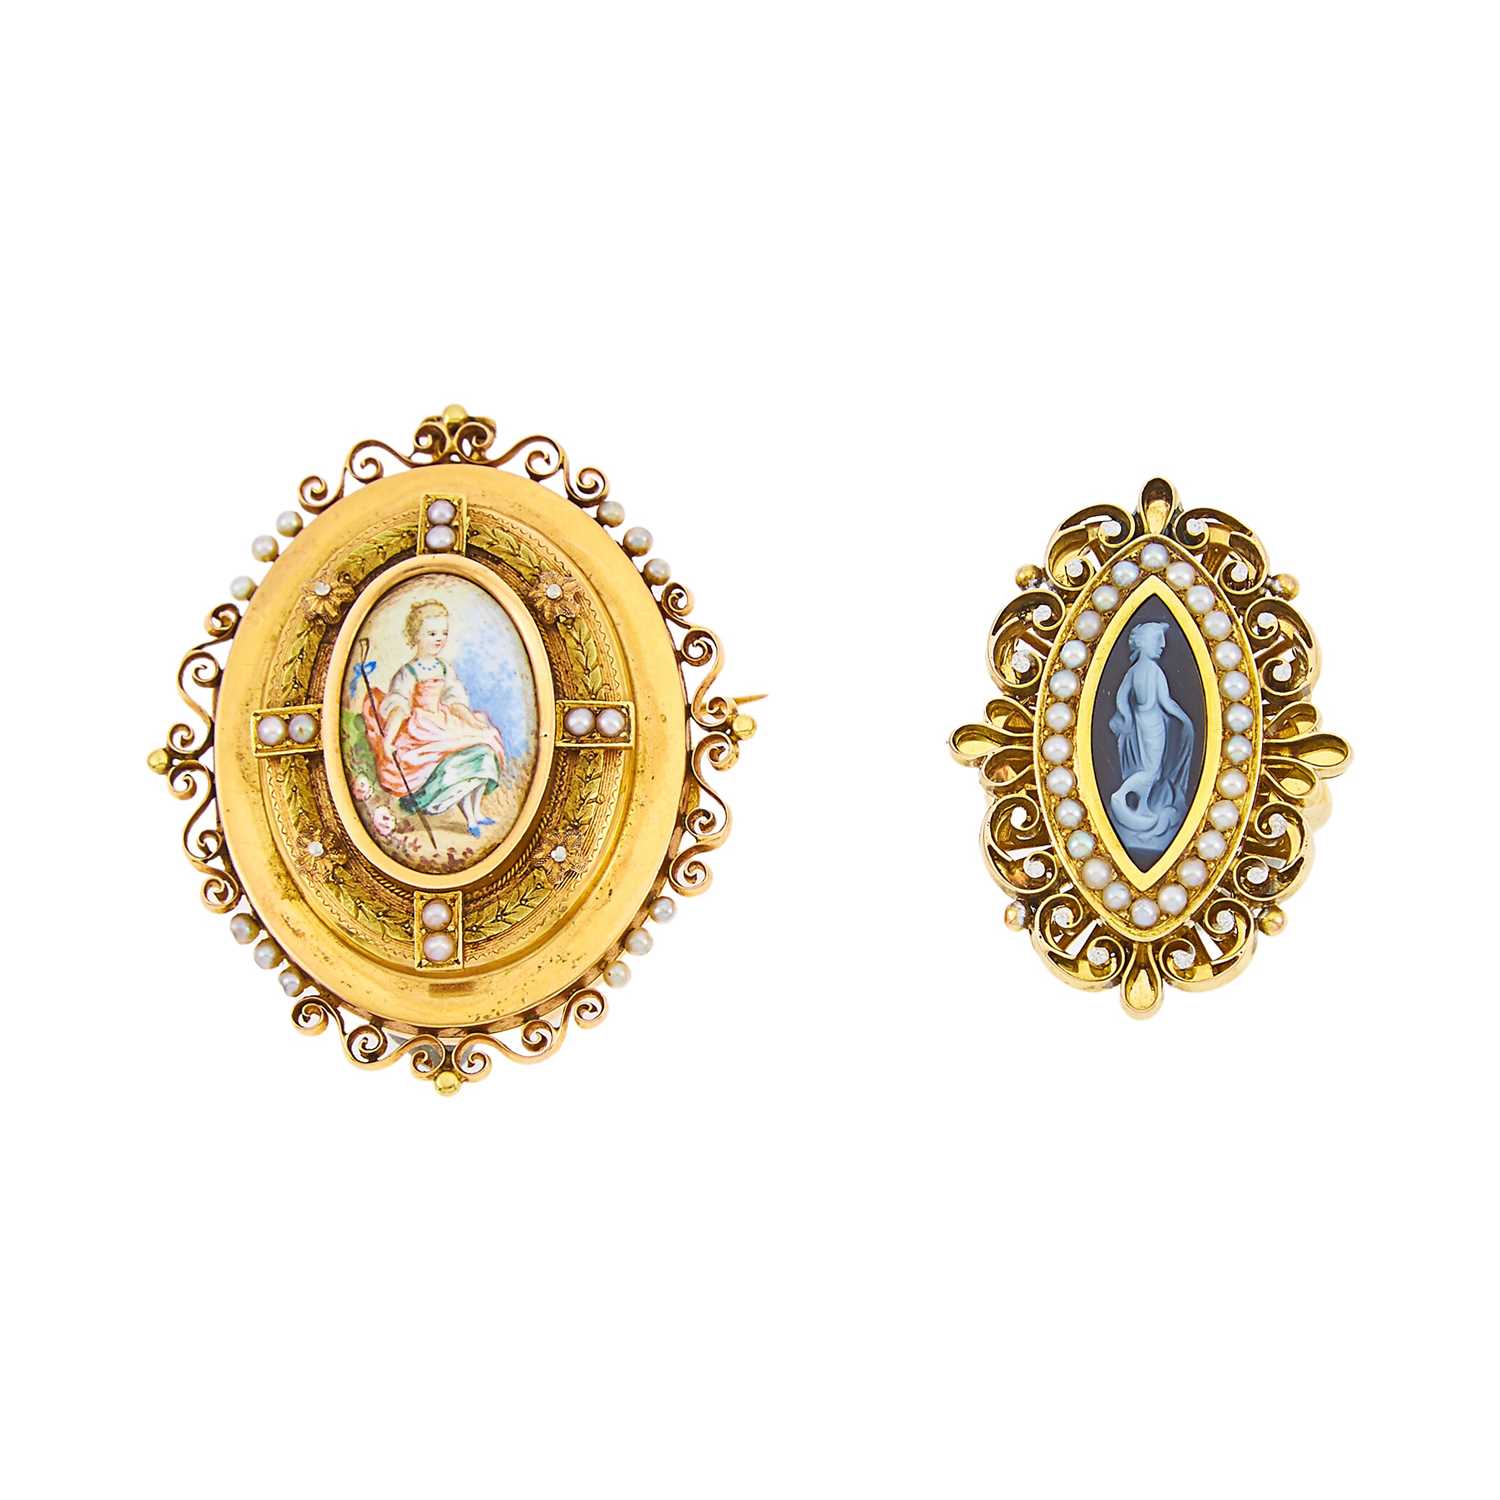 Lot 1129 - Gold, Sardonyx Cameo and Split Pearl Ring and Two-Color Gold, Painted Porcelain and Split Pearl Locket-Brooch